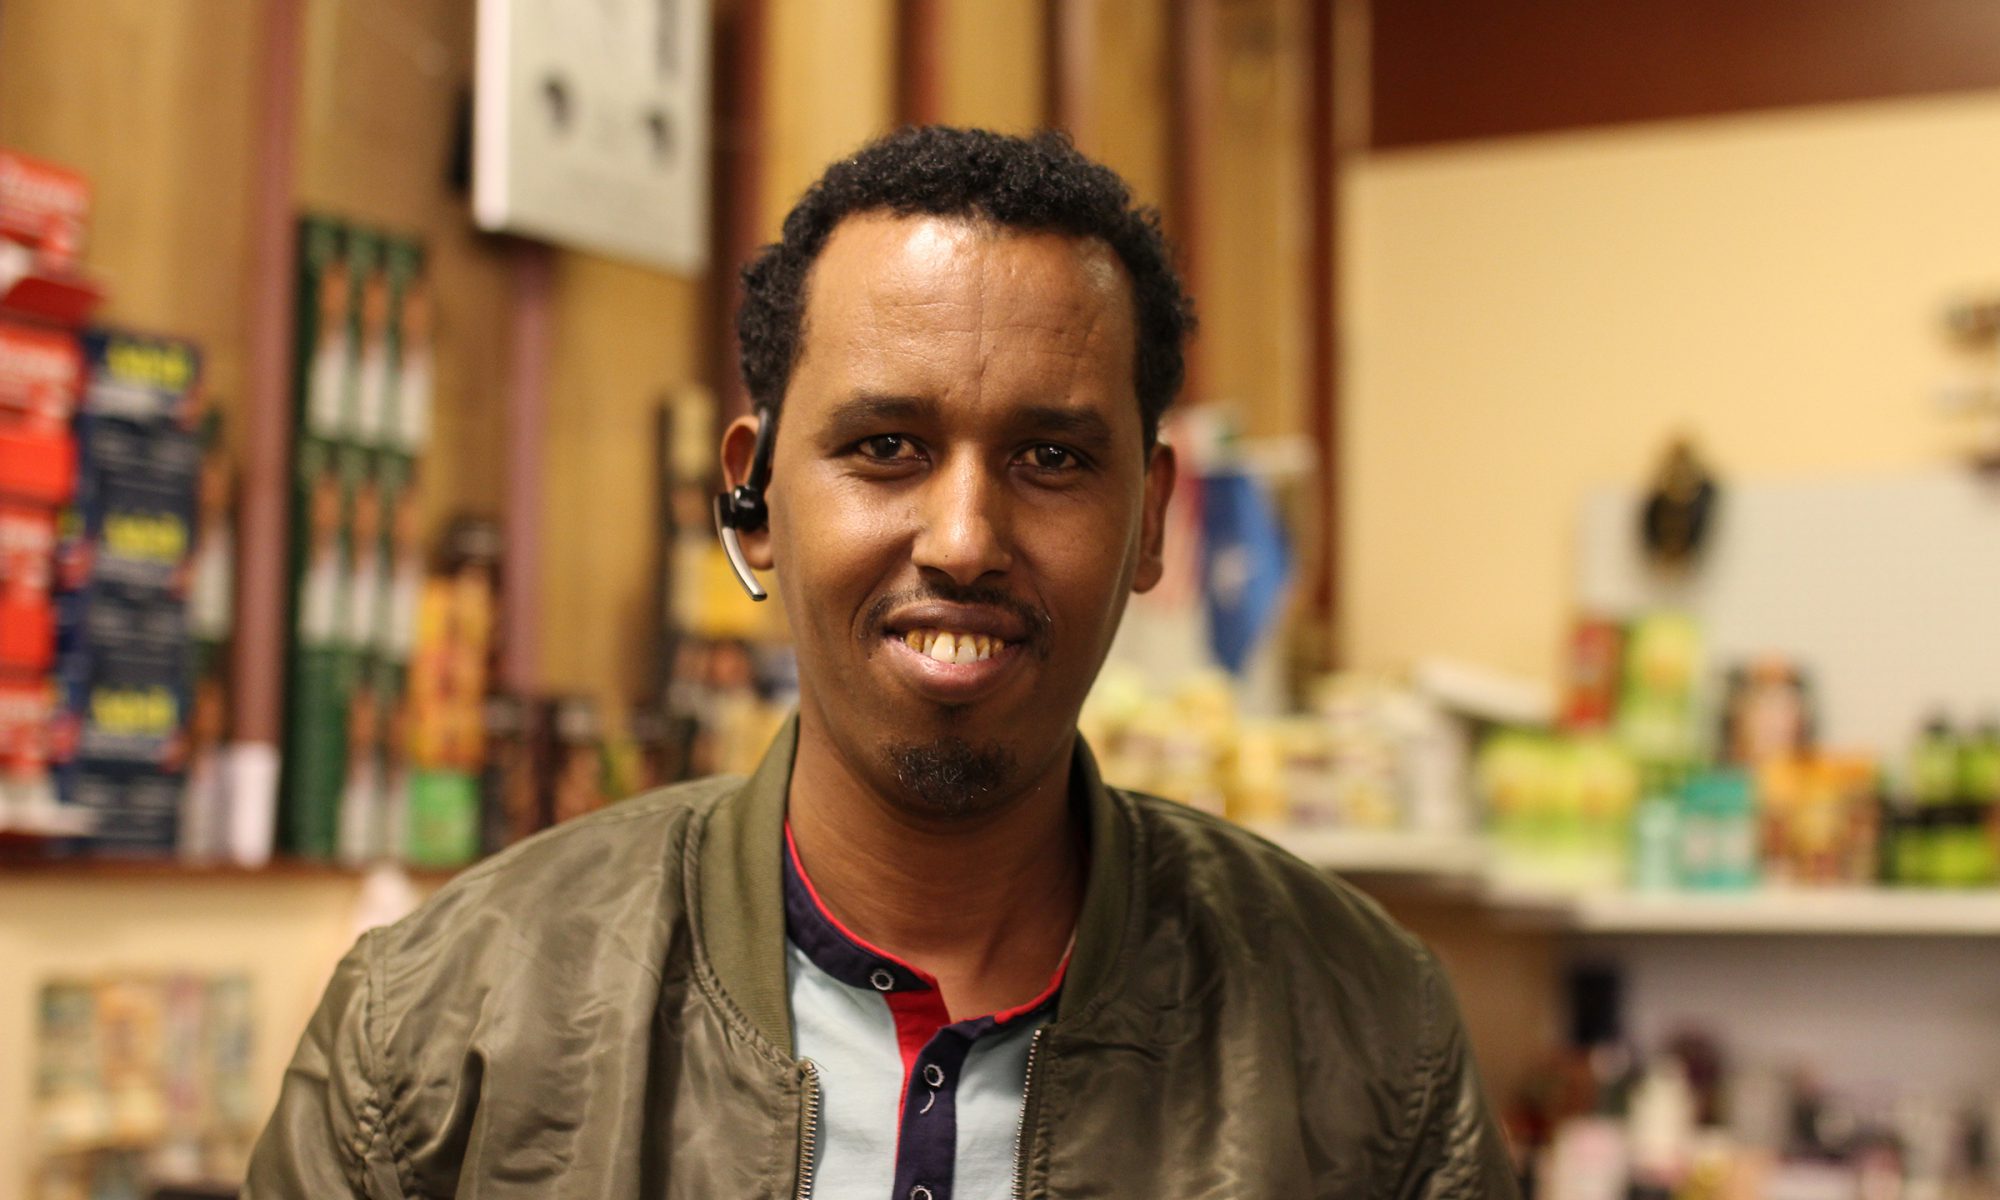 Five years ago, Abdiwahab Hade opened the Fort Morgan Mini-Halal Market. Since then, he has also opened a café and a small clothing boutique. Credit: Esther Honig/KUNC